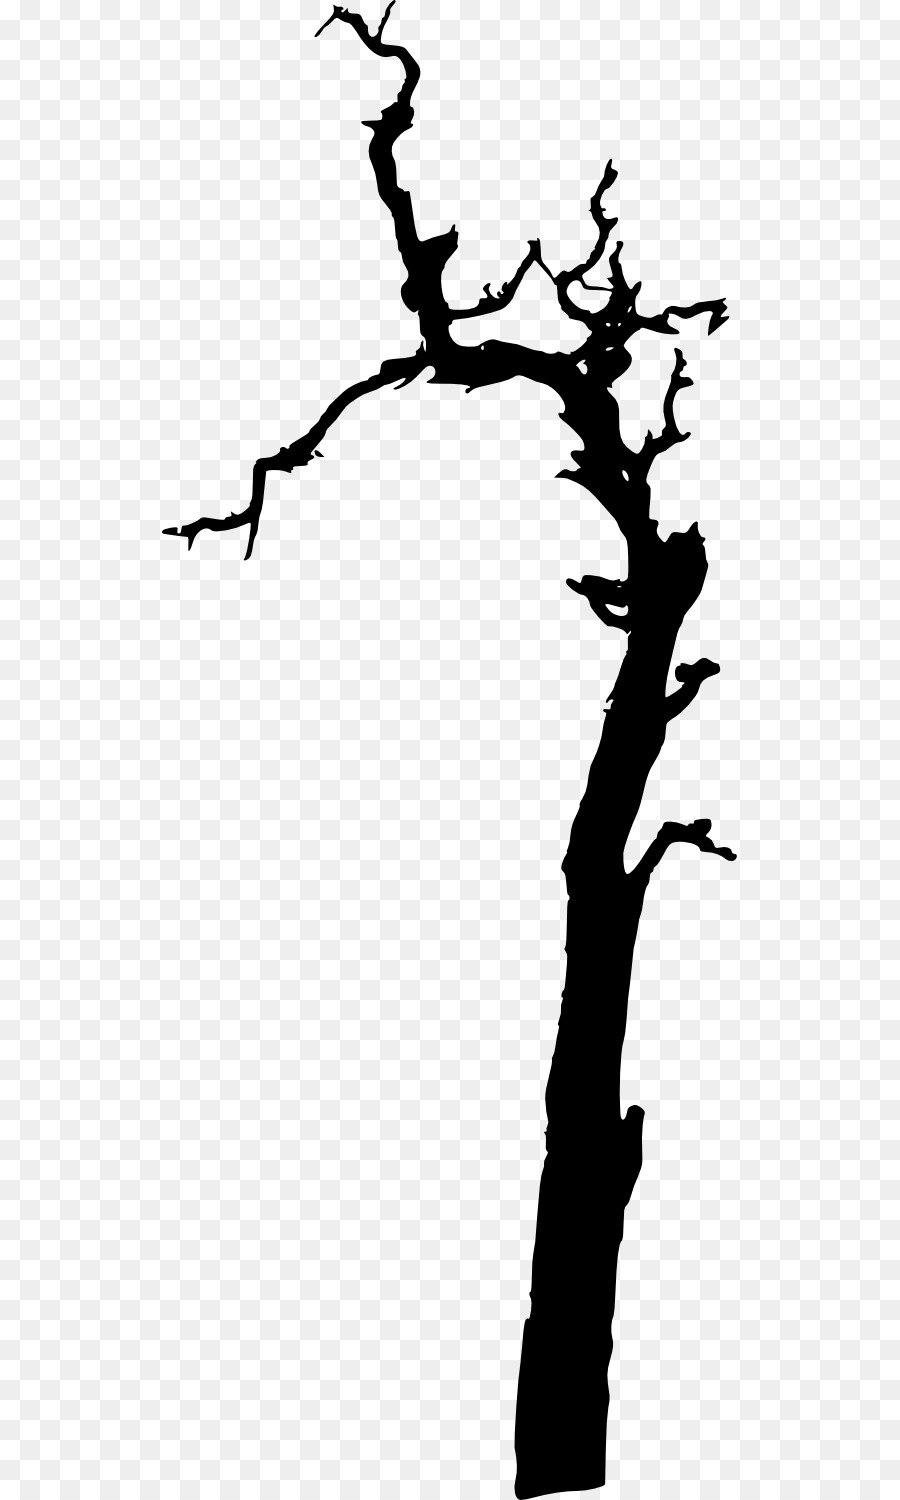 Twig Clip art - Silhouette png download - 575*1500 - Free Transparent Twig png Download.